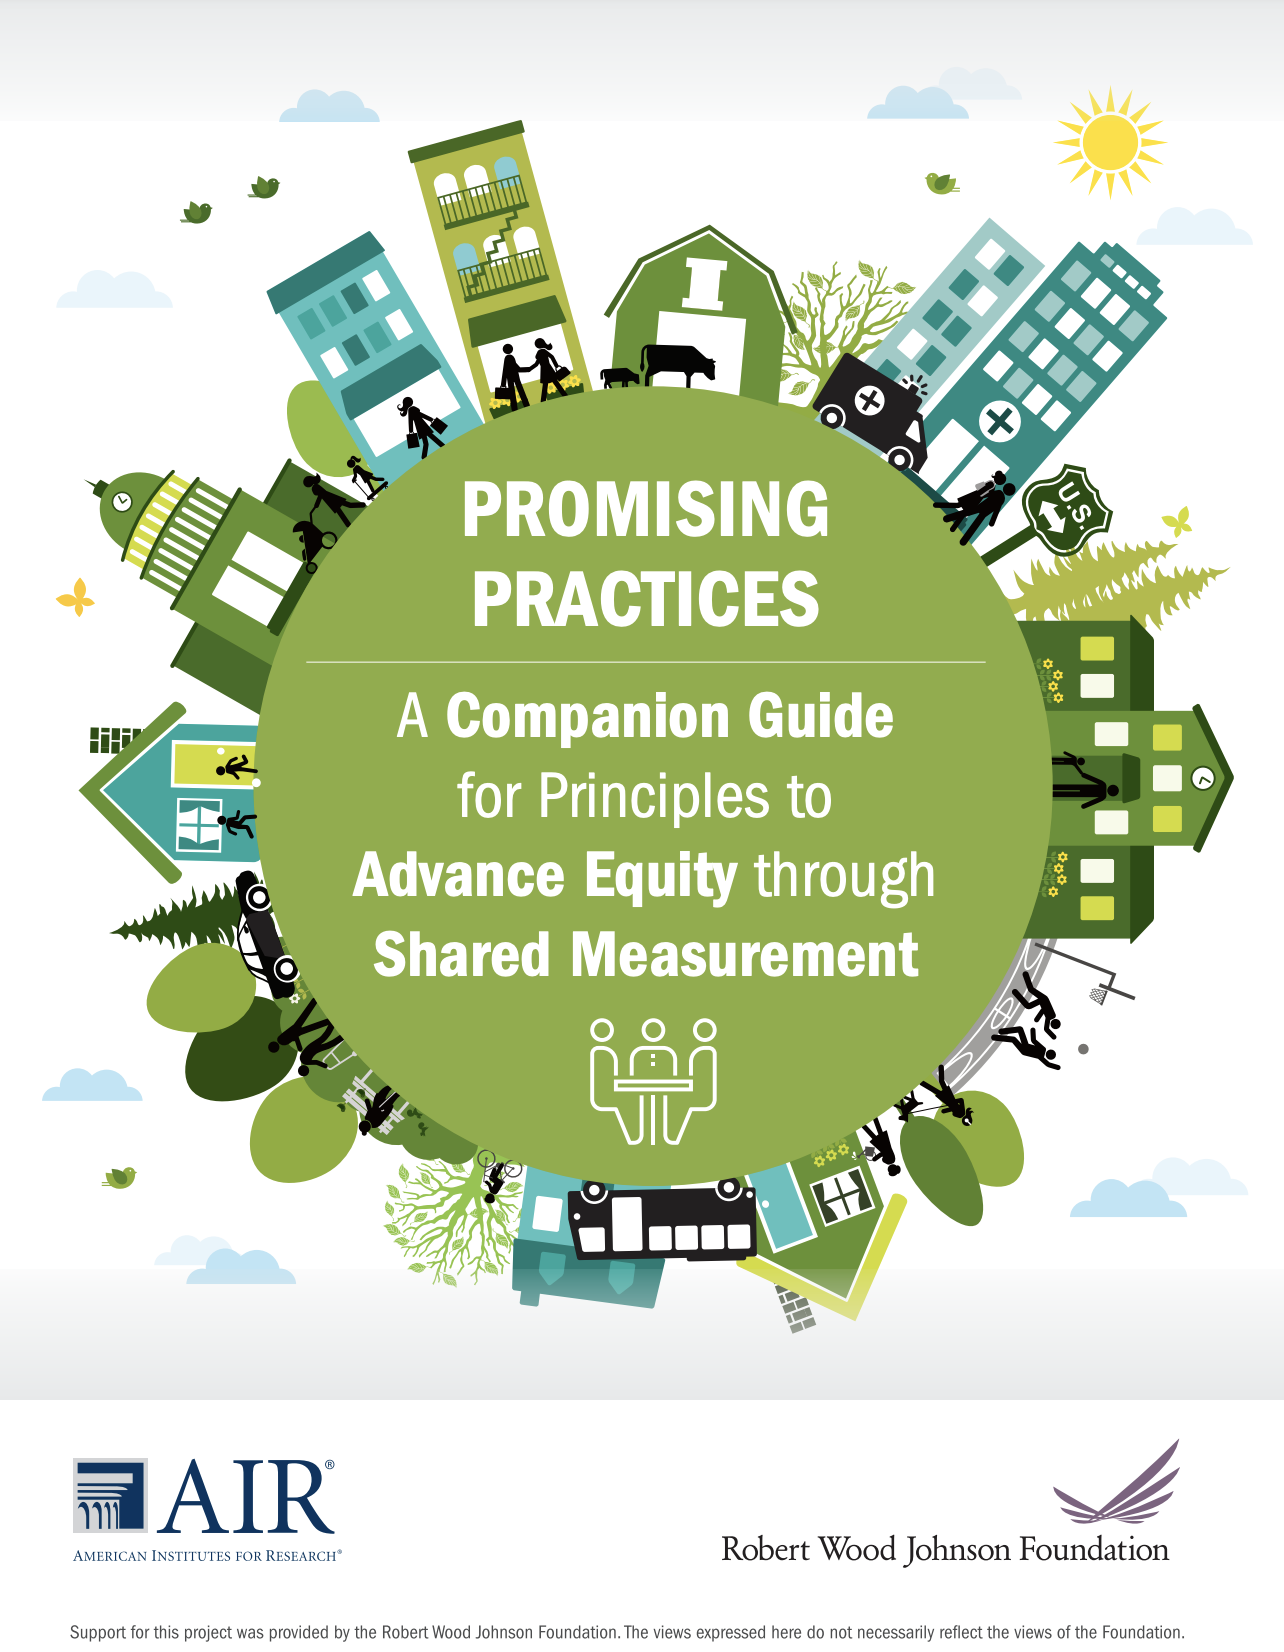 Promising Practices: A Companion Guide for Principles to Advance Equity through Shared Measurement